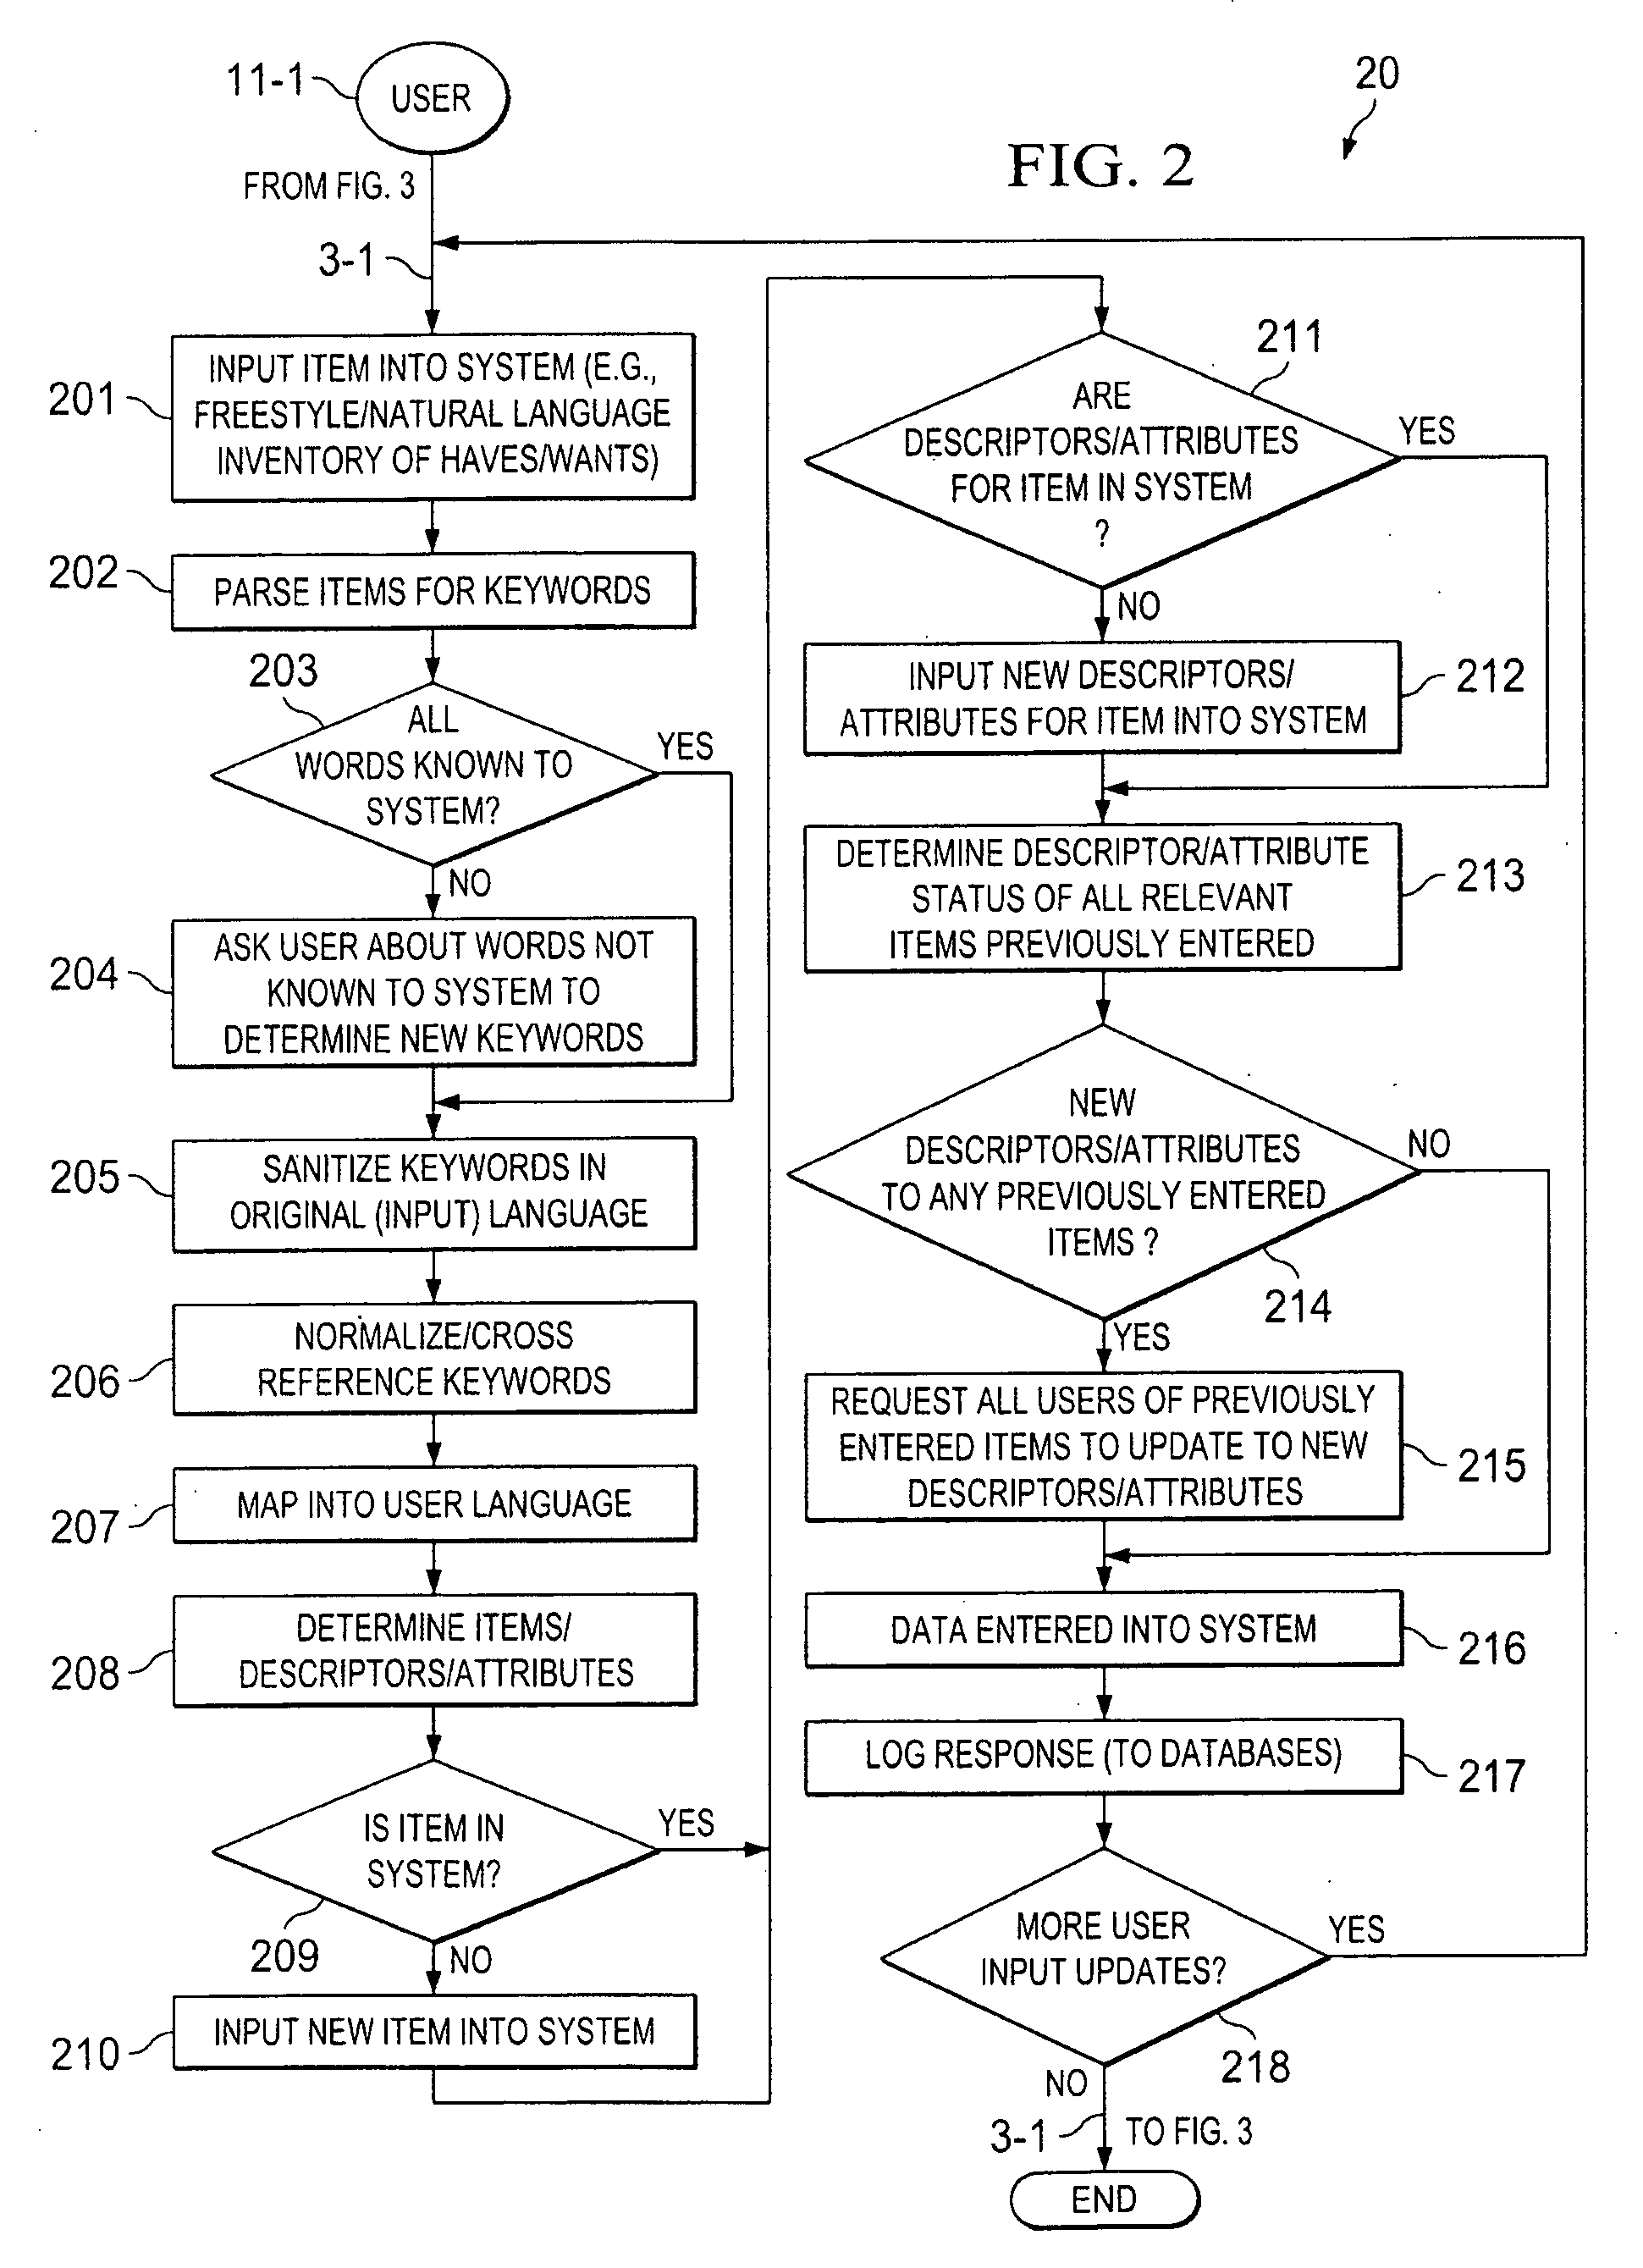 System and method for providing information on selected topics to interested users